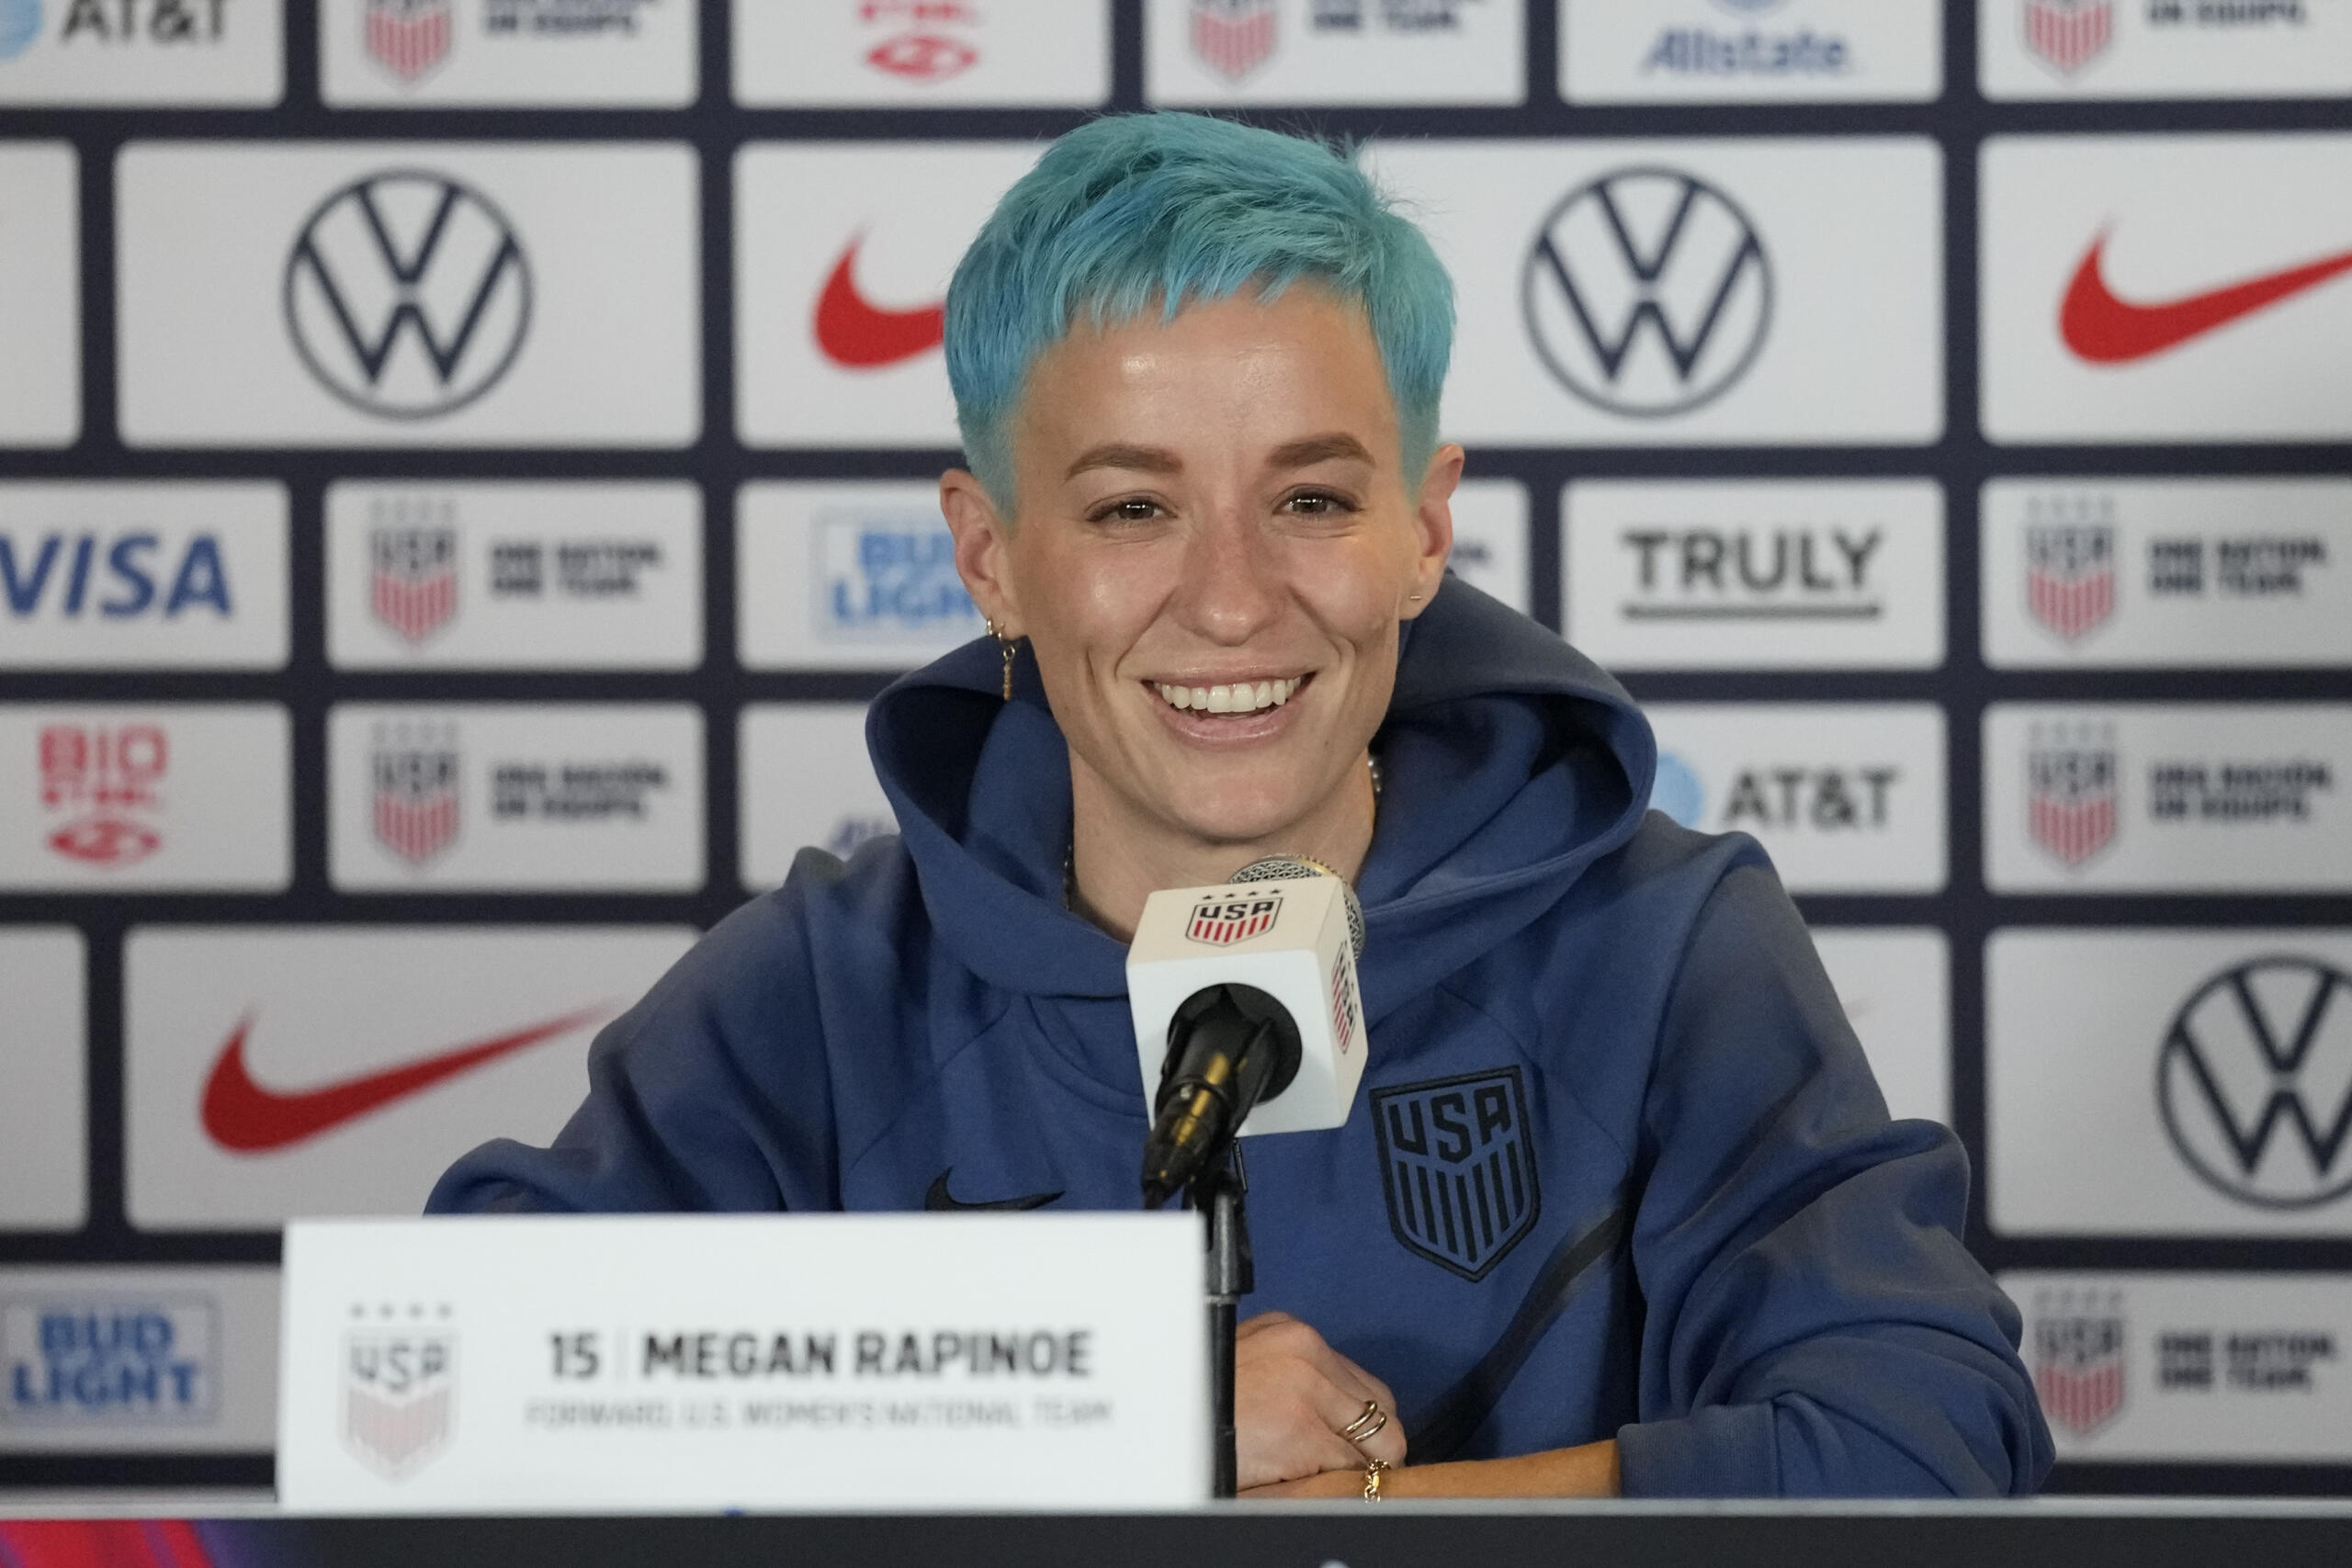 FILE- U.S soccer player Megan Rapinoe speaks to reporters during the 2023 Women's World Cup media day for the United States Women's National Team in Carson, Calif., Tuesday, June 27, 2023. Days before heading to her fourth World Cup, Rapinoe announced she’ll retire at the end of the National Women's Soccer League season. Rapinoe, 38, made the announcement on Twitter Saturday, July 8, 2023.